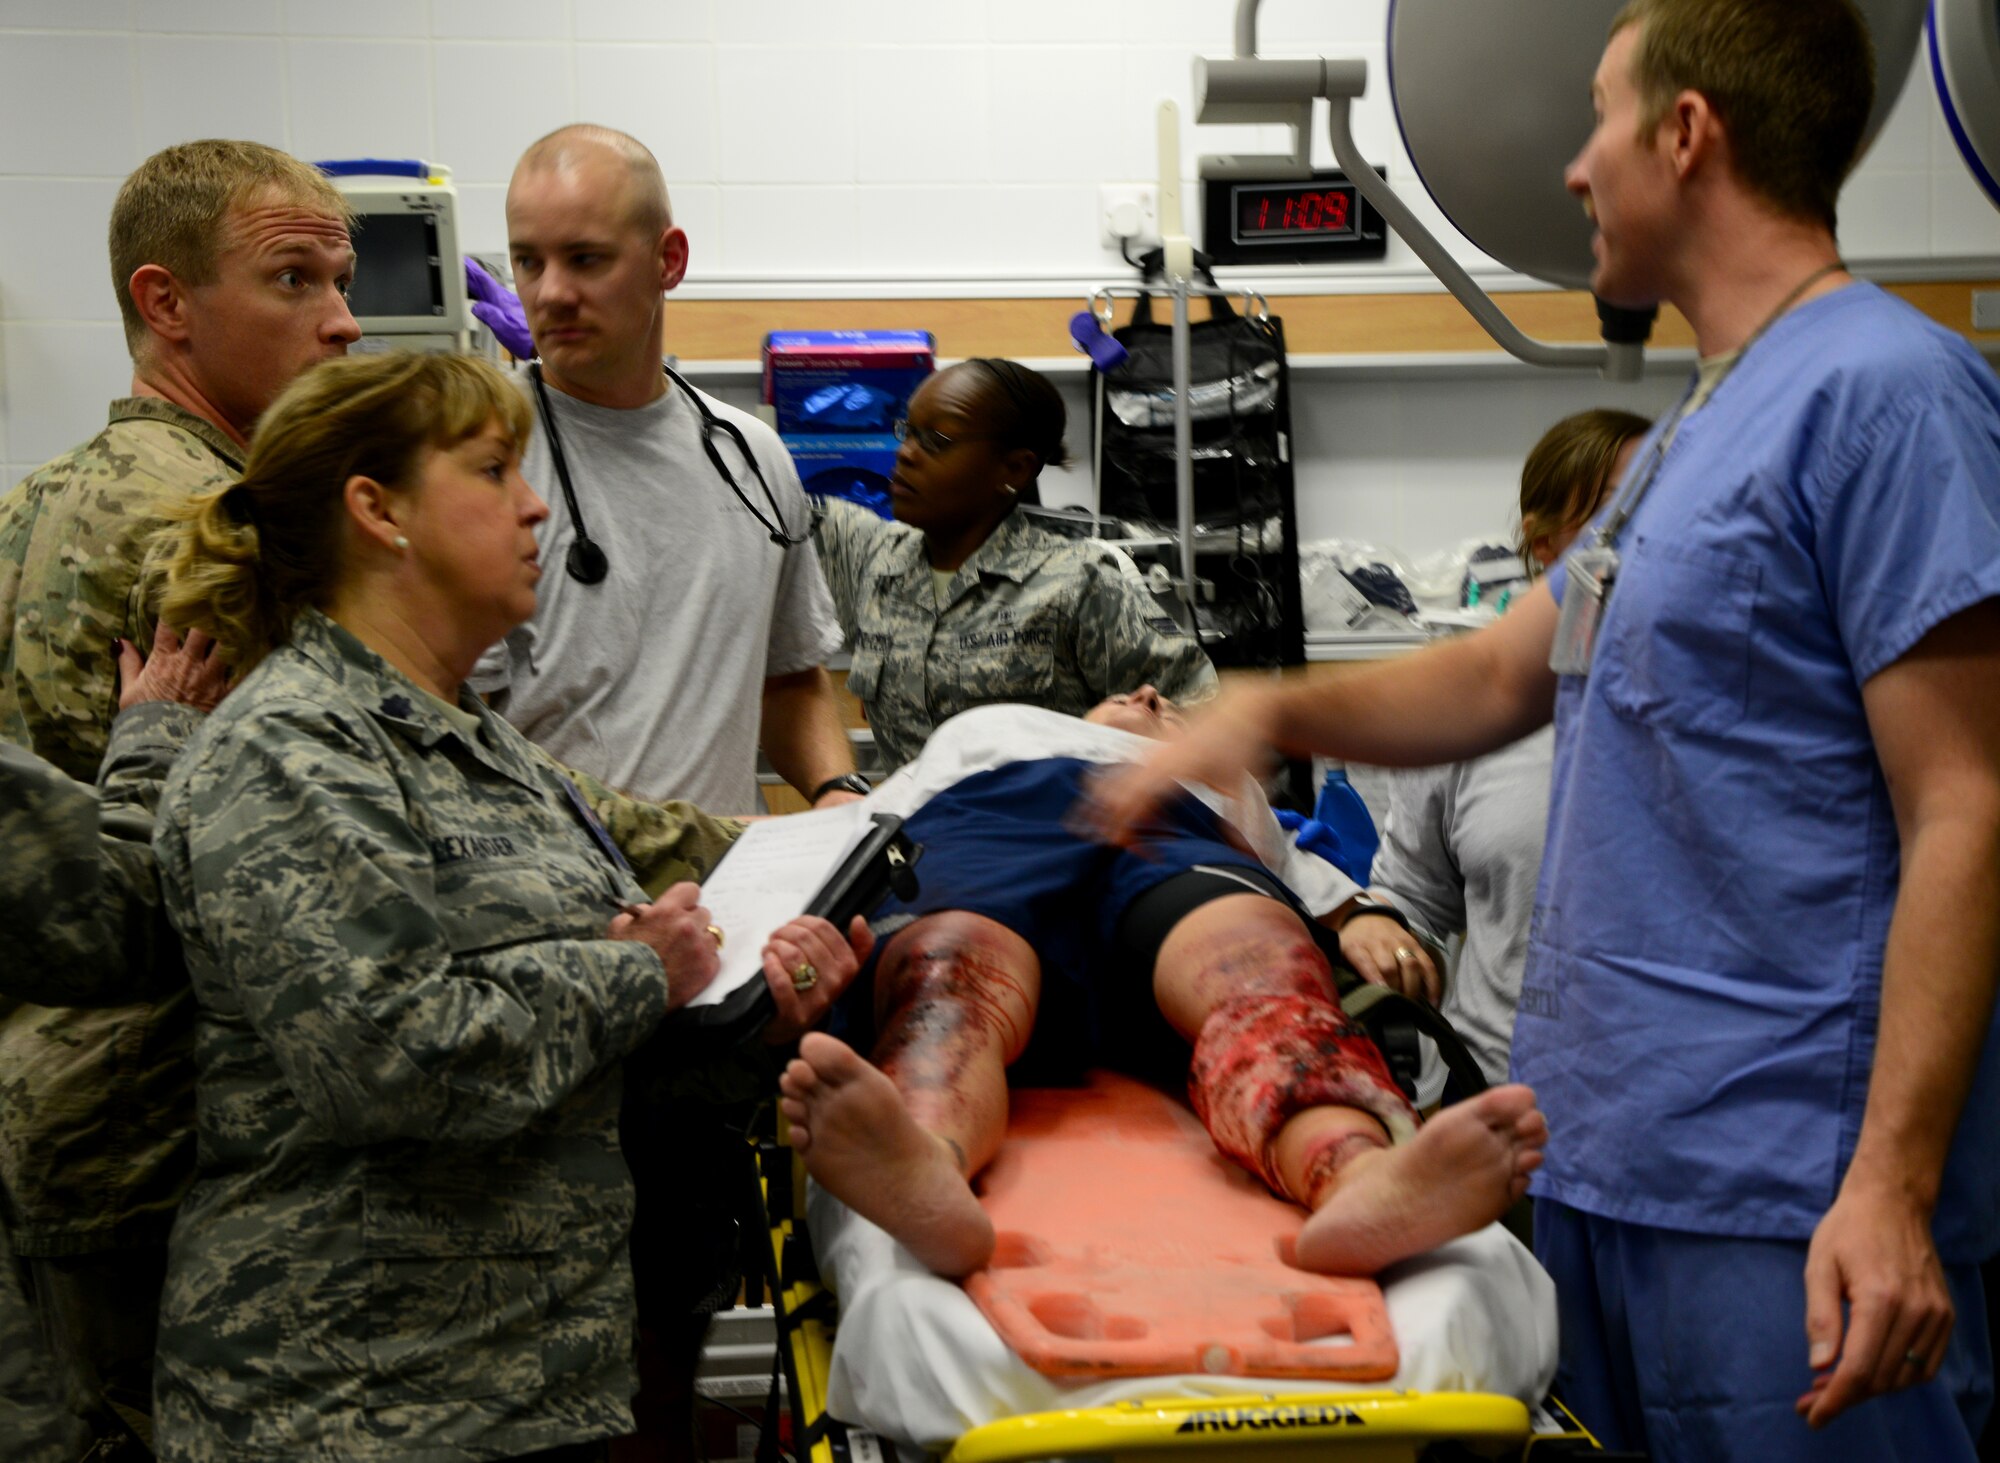 U.S. Air Force Airmen from the 379th Expeditionary Medical Group tend to a simulated victim of a vehicle accident during a mass casualty exercise Nov. 10, 2014, at Al Udeid Air Base, Qatar. The training provided by these types of exercises keep Airmen ready to respond to real-world scenarios at a moment’s notice. (U.S. Air Force photo by Senior Airman Kia Atkins). 